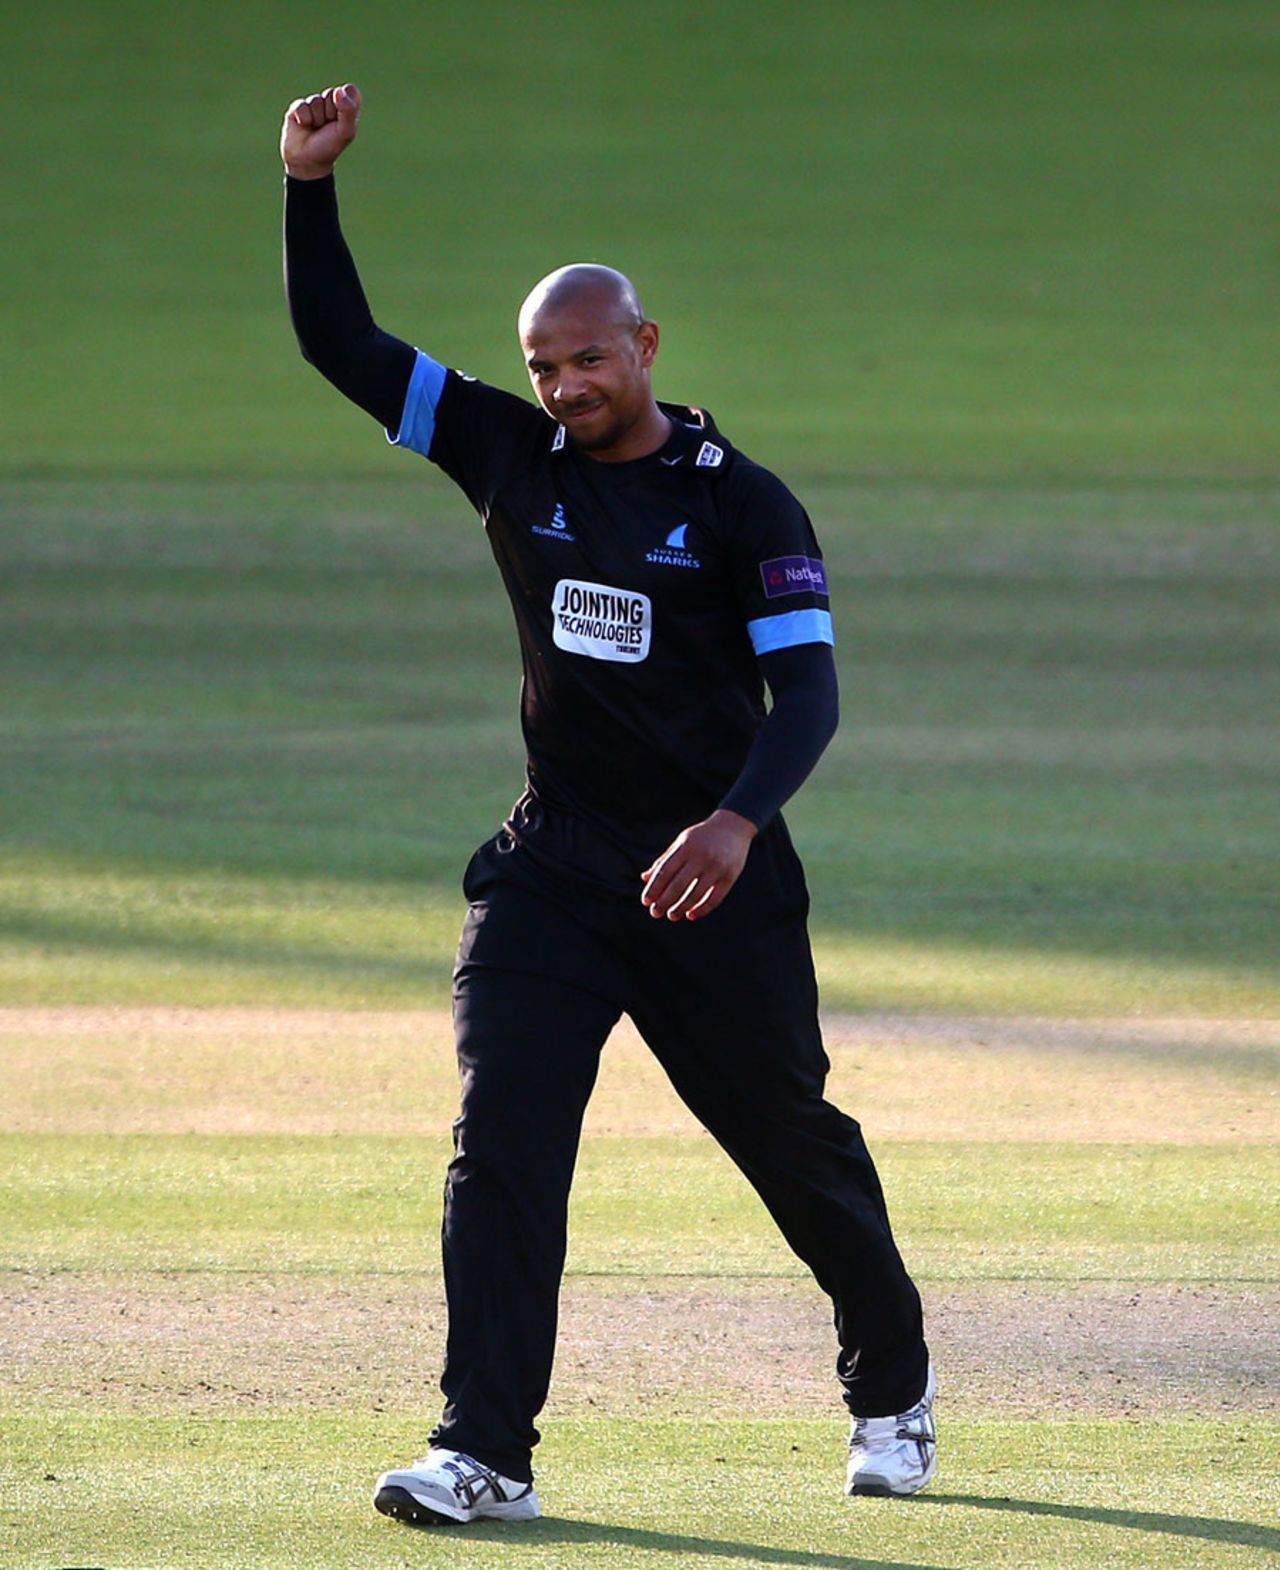 Sussex bowler Tymal Mills celebrates one of his four wickets against Middlesex, Middlesex v Sussex, Natwest T20 Blast, South Group, Lord's, July 2, 2015